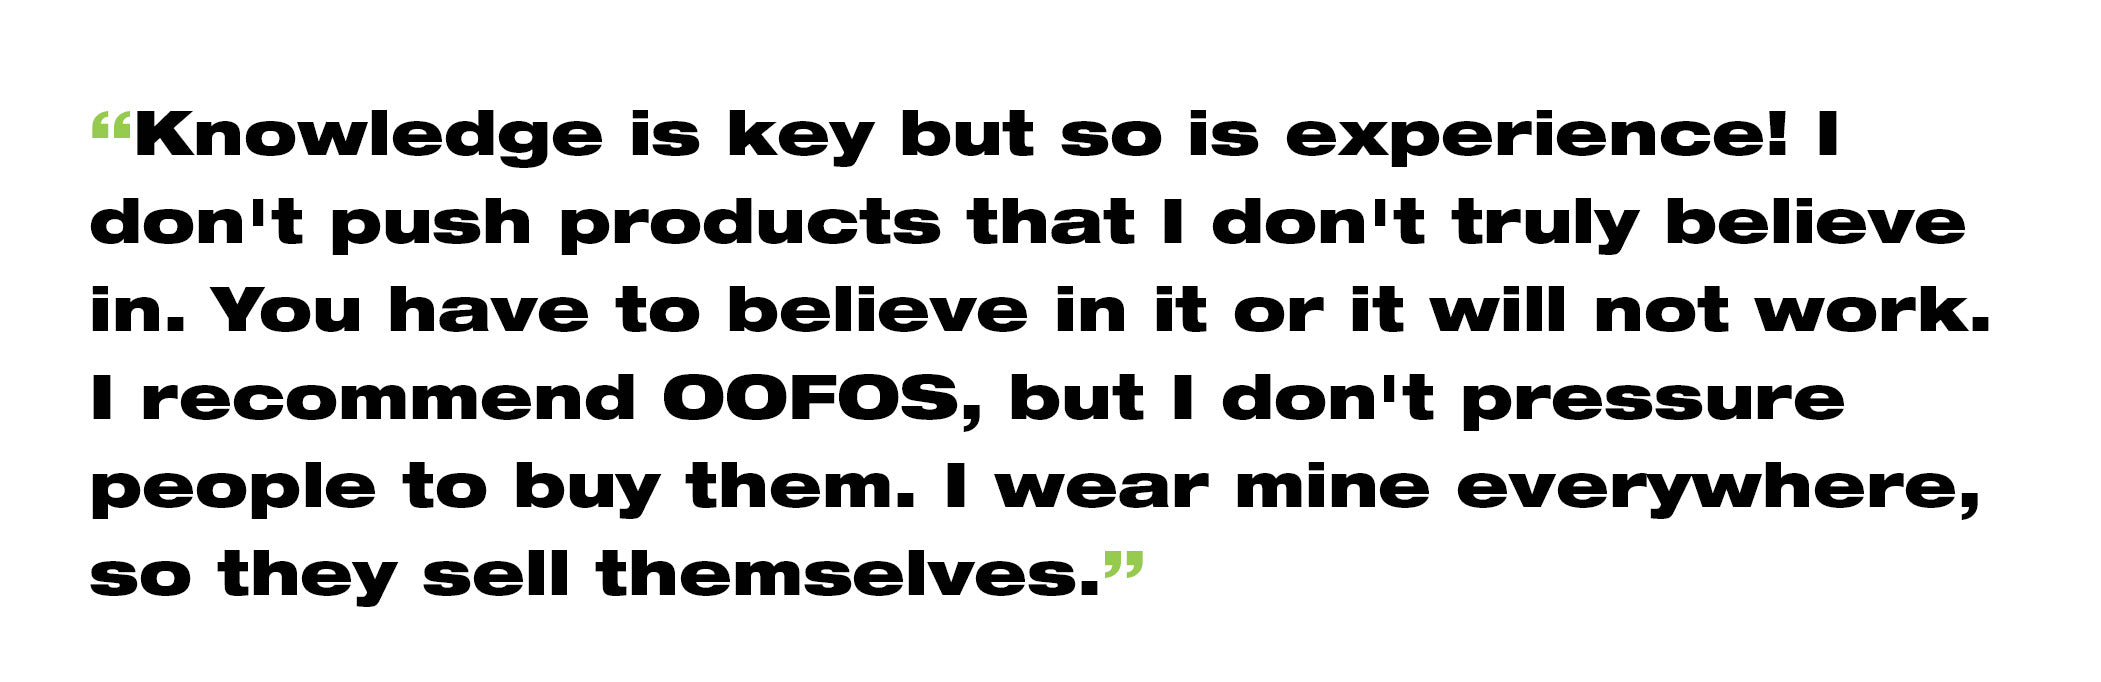 “Knowledge is key but so is experience! I don't push products that I don't truly believe in. You have to believe in it or it will not work. I recommend OOFOS, but I don't pressure people to buy them. I wear mine EVERYWHERE so they sell themselves.”